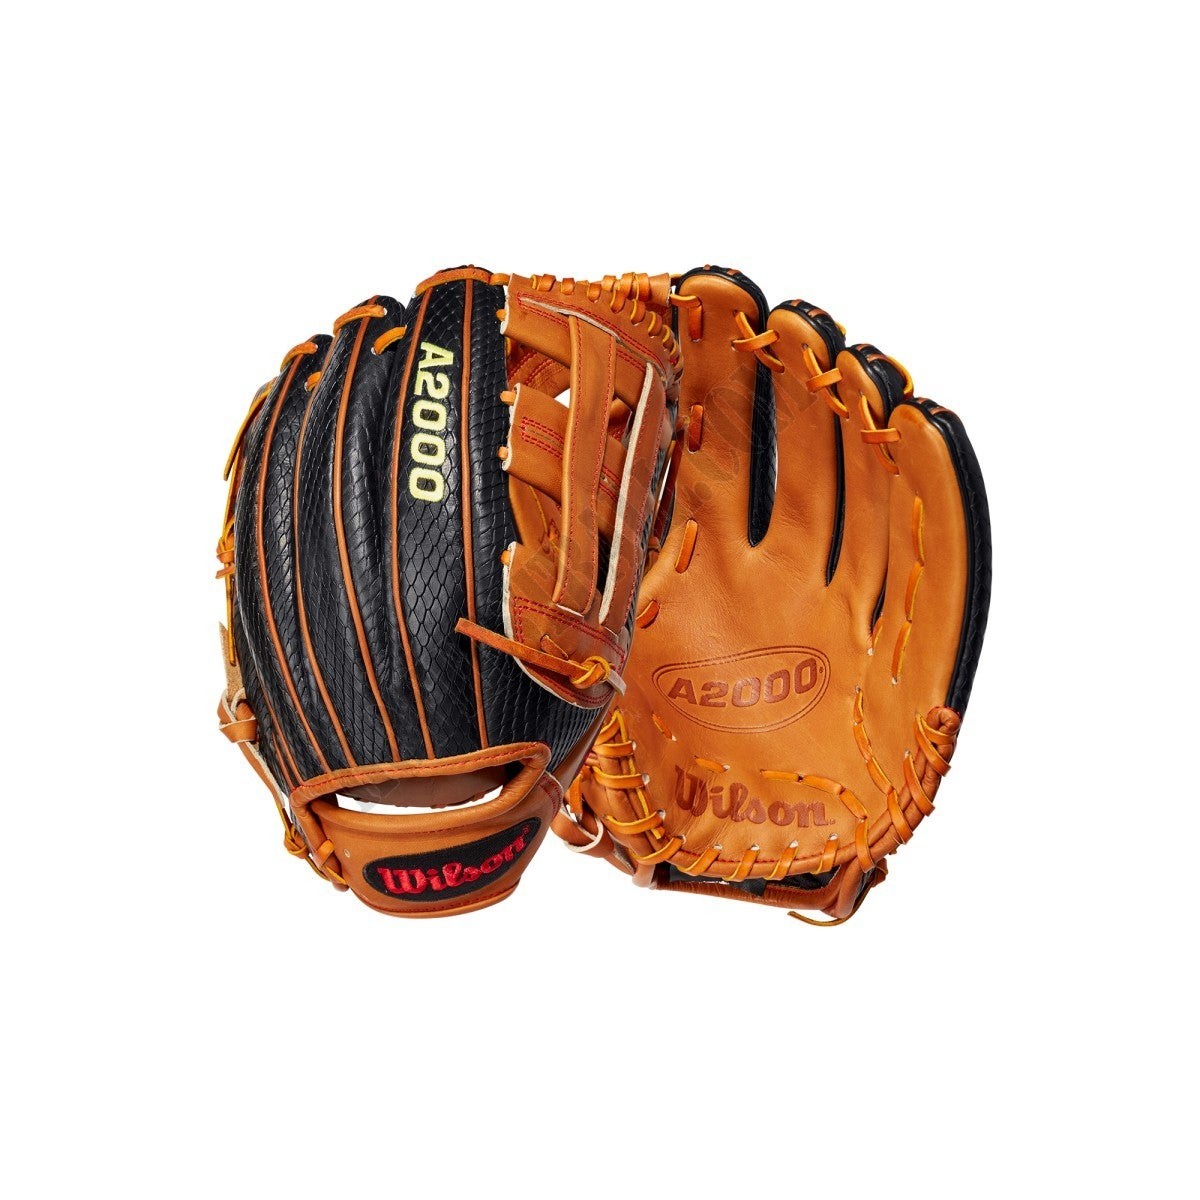 2021 A2000 DW5 12" Infield Baseball Glove -  Limited Edition ● Wilson Promotions - -0